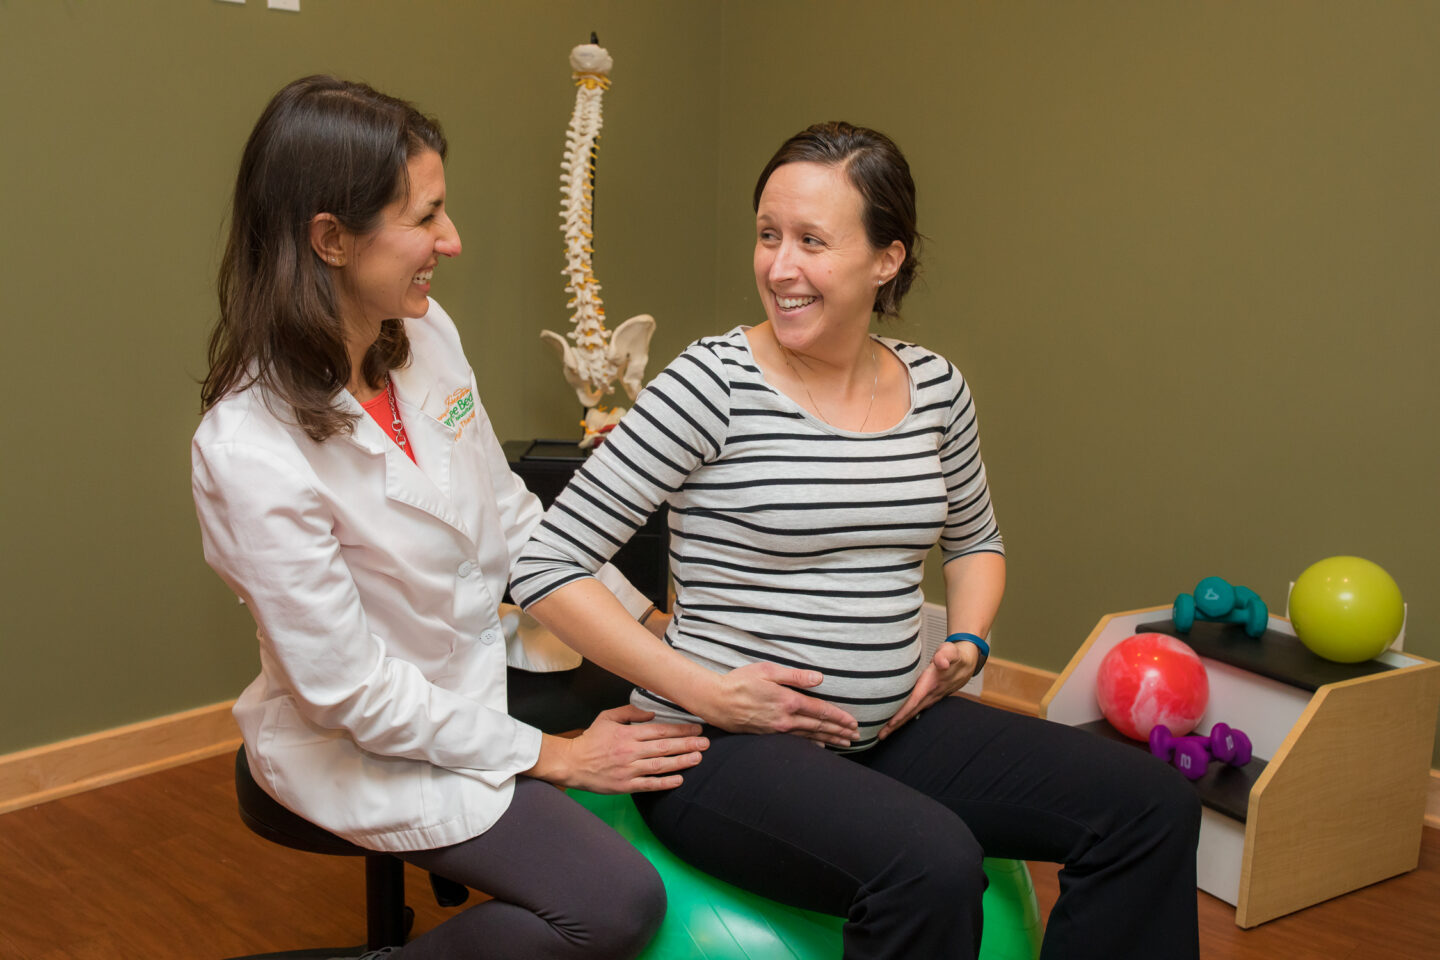 A physical therapist assists a pregnant woman with pelvic exercises on a stability ball.